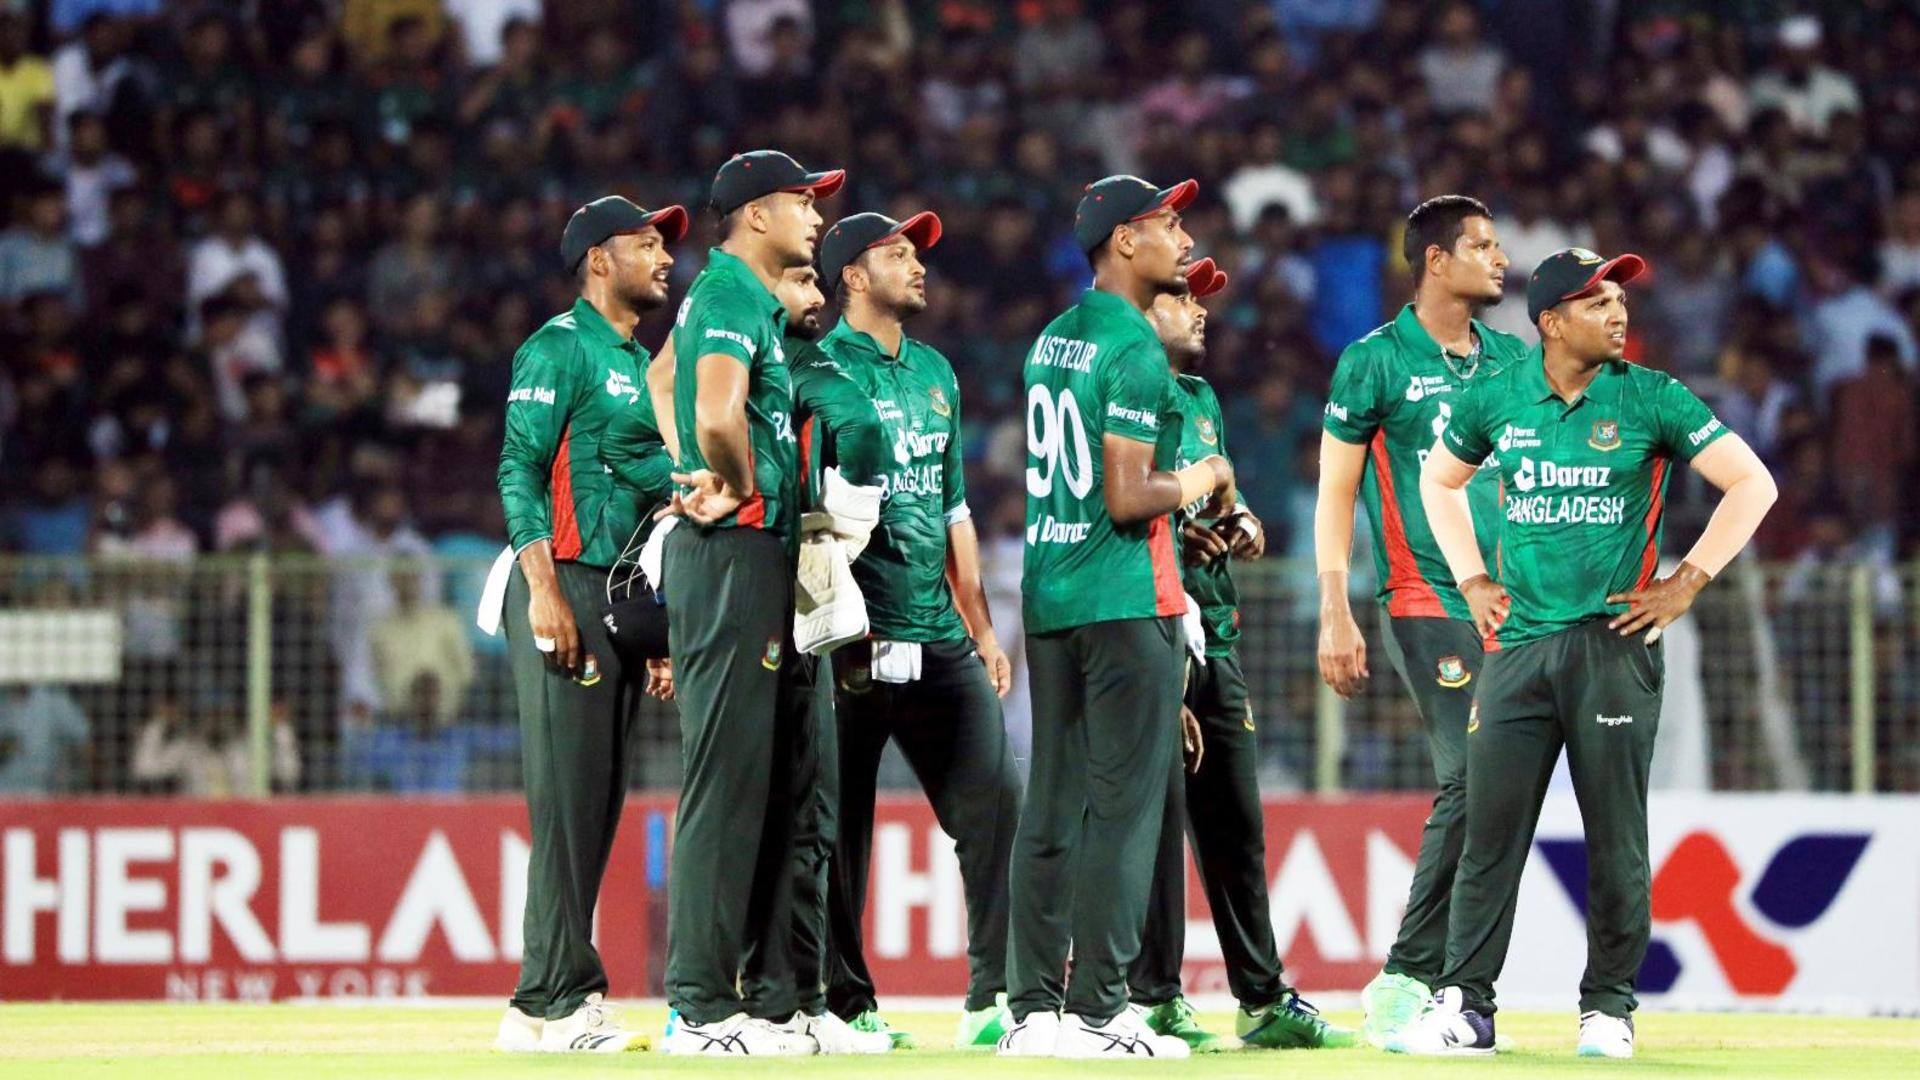 1st T20I, Bangladesh pip Afghanistan in last-over thriller: Key stats